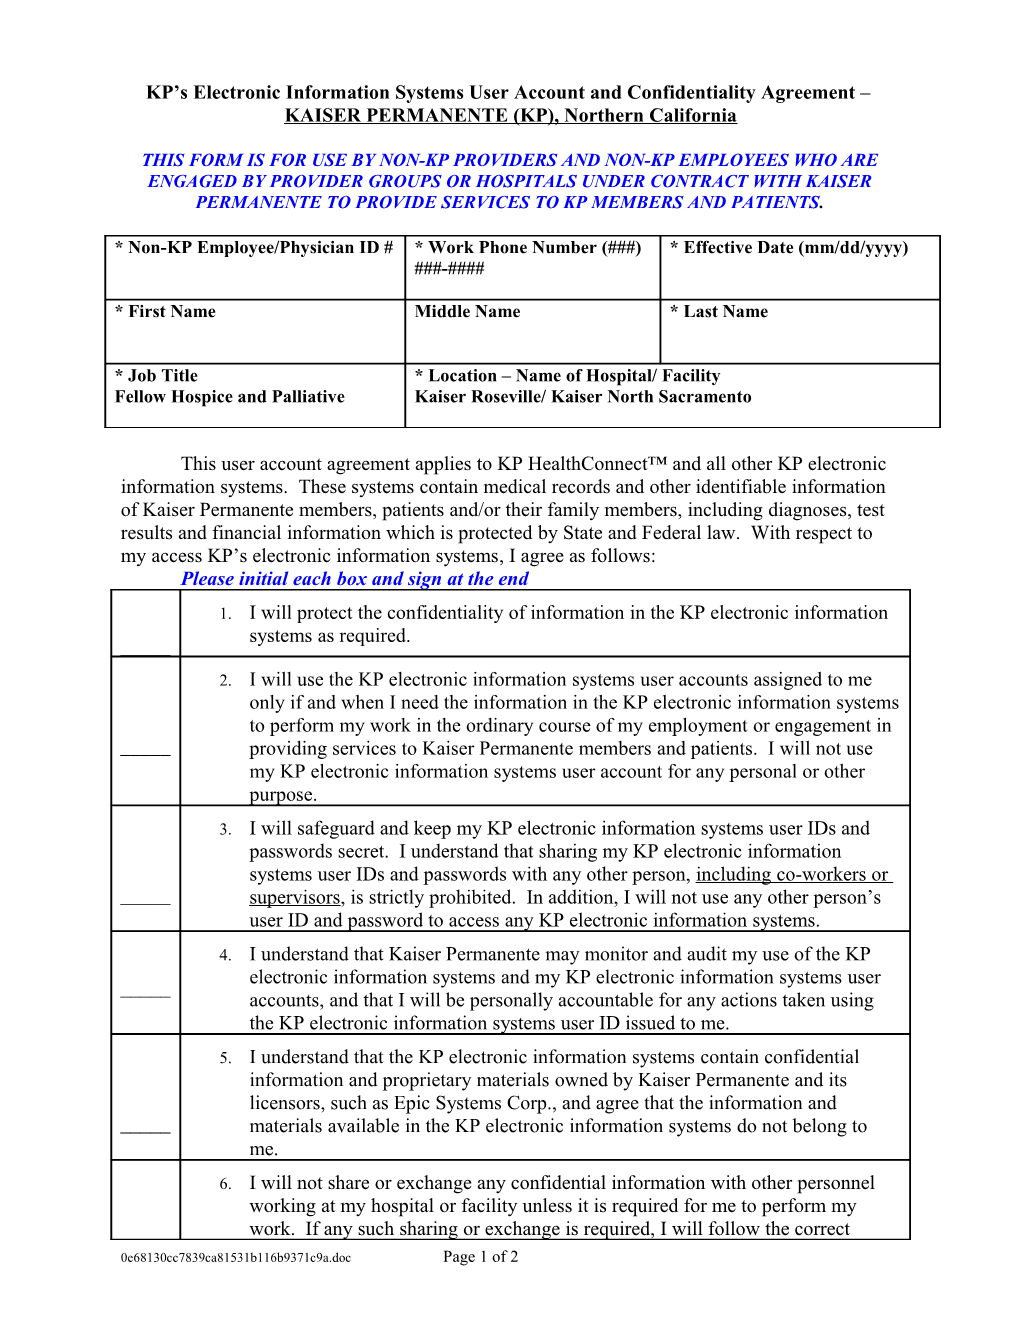 KP S Electronic Information Systems User Account and Confidentiality Agreement